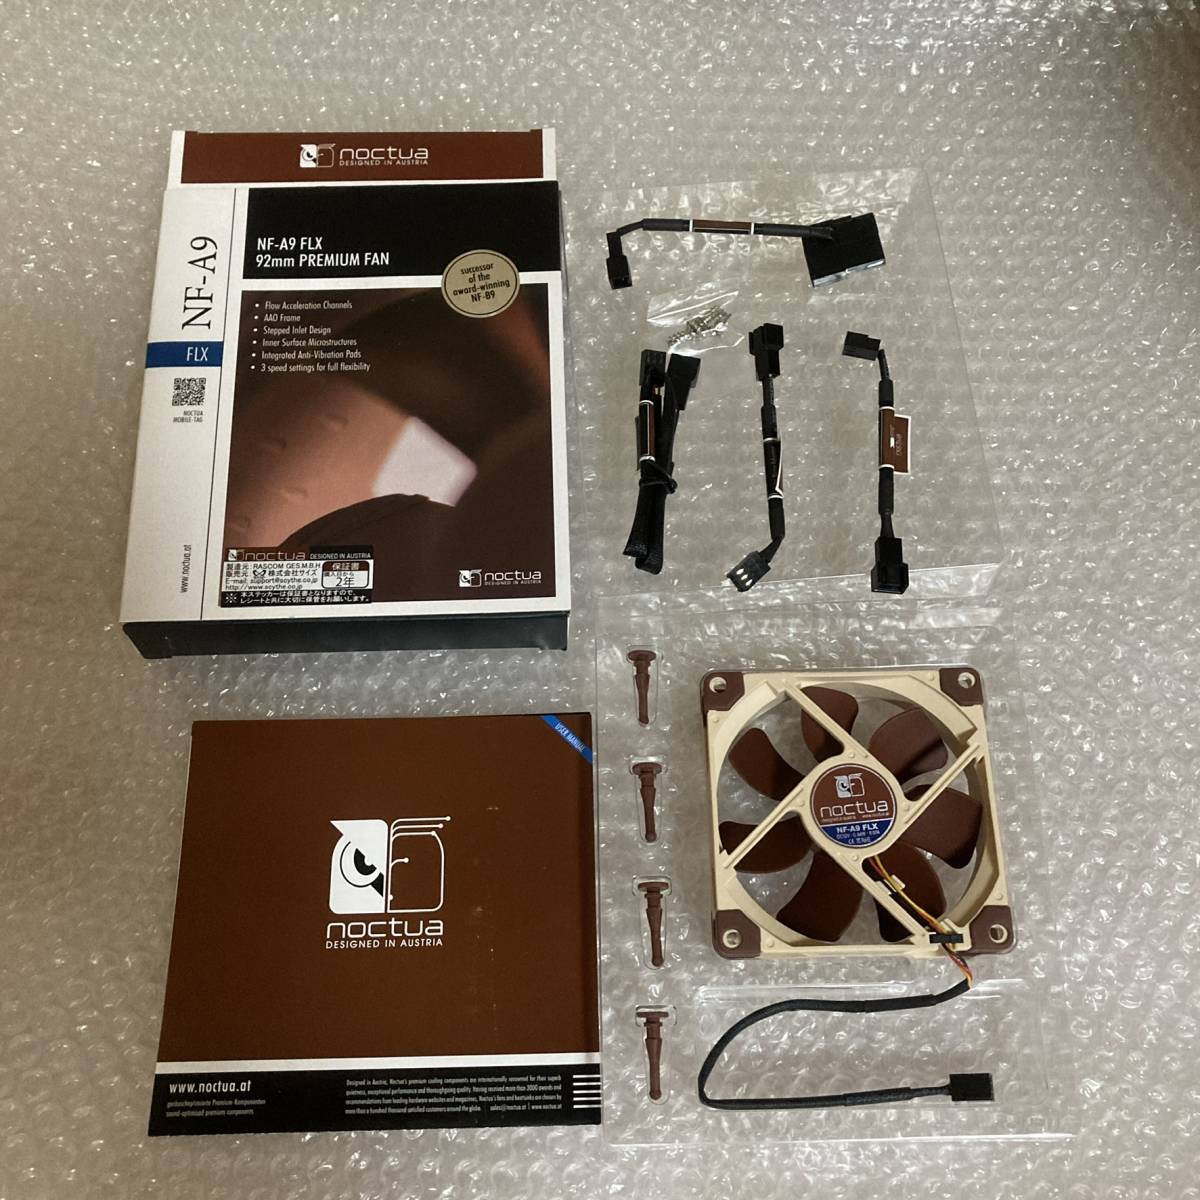 Noctua NF-A9 FLX 92mm PREMIUM FAN 3-Pin接続【元箱付き/付属品付き/プレミアム静音ファン/ブラウン】の画像1